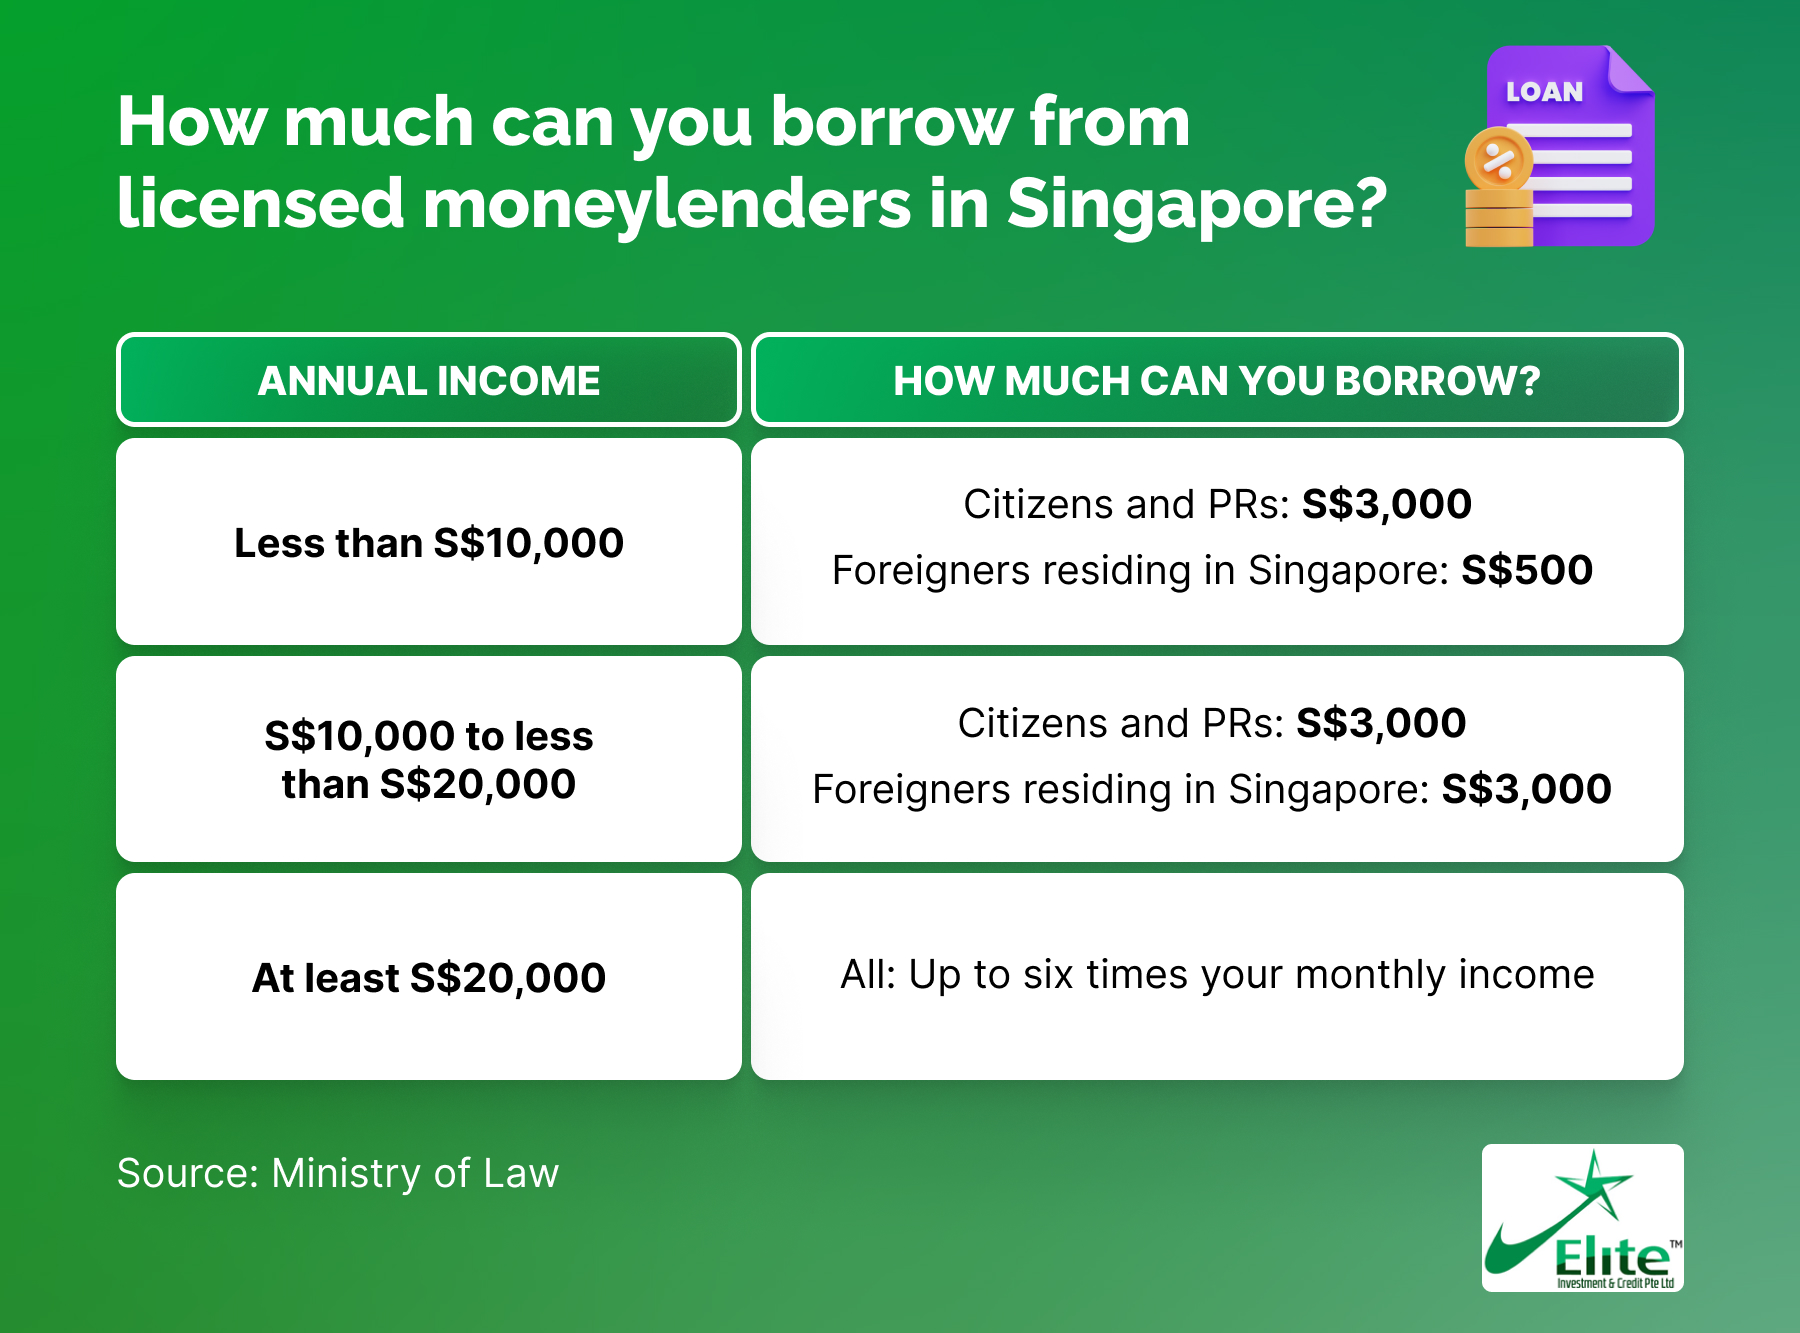 How much can you borrow from licensed moneylenders in Singapore